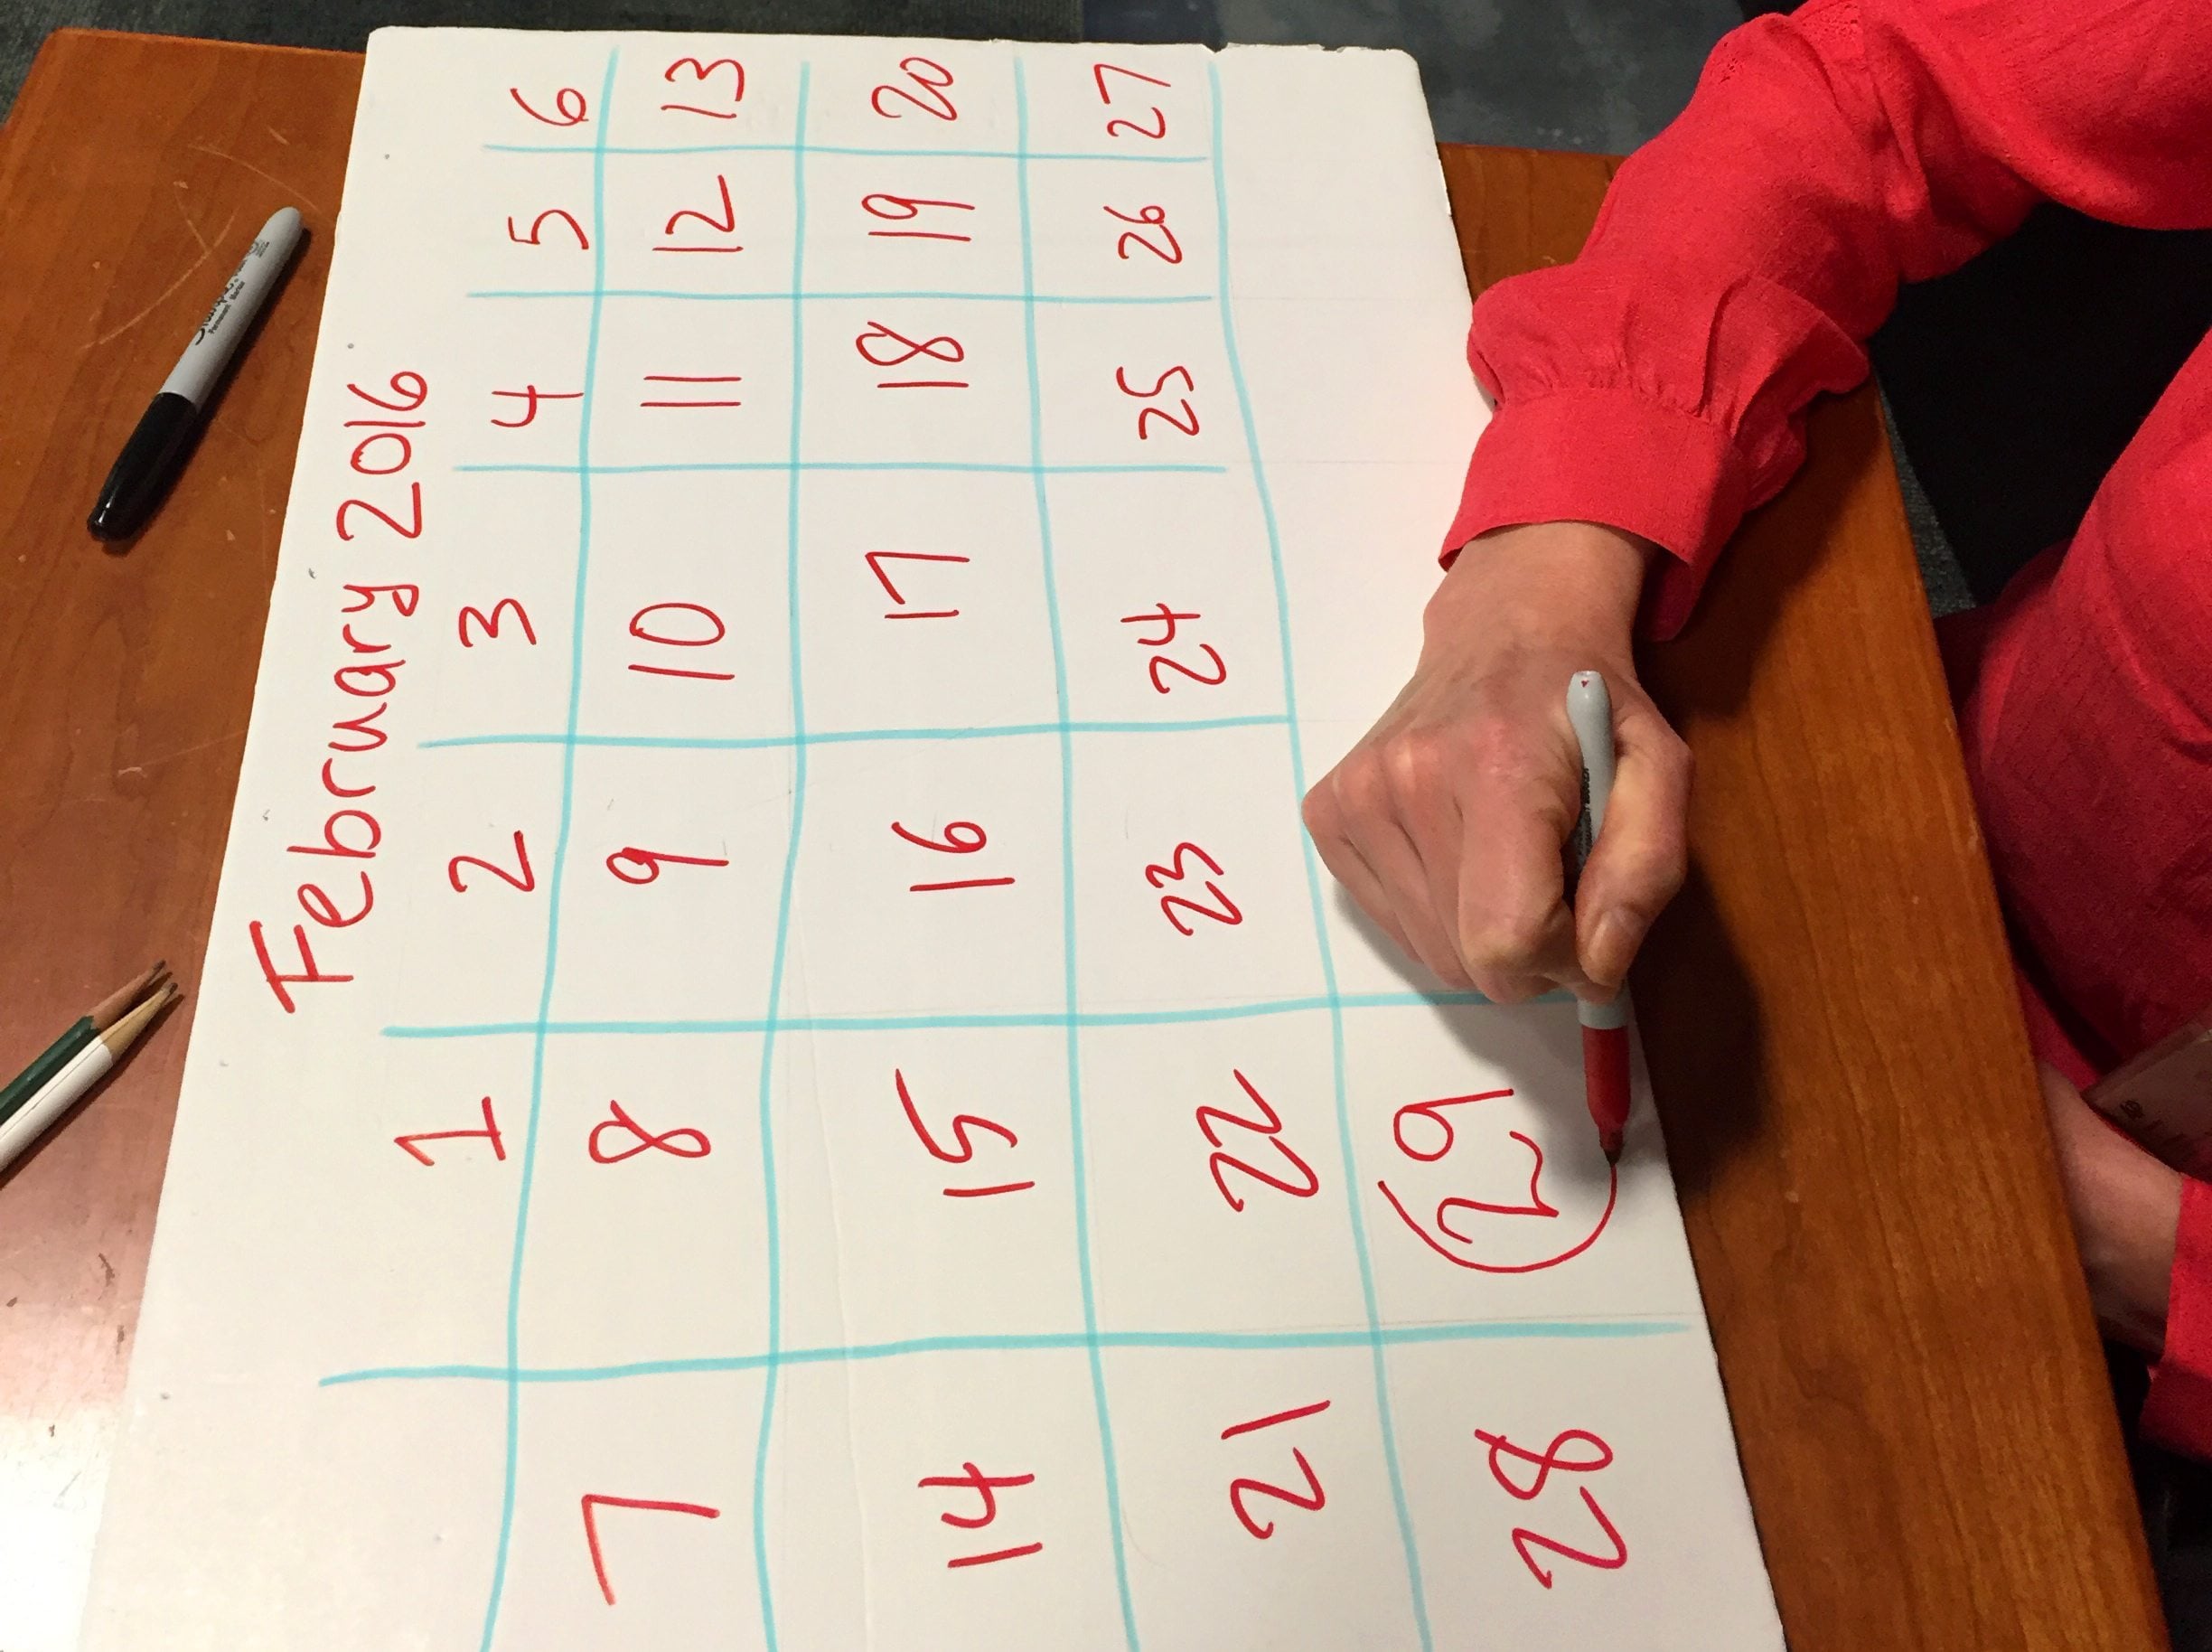 This Feb. 23, 2016 photo shows a homemade February 2016 calendar illustrating leap year. Feb. 29 is that extra day that rolls around every four years. Leap Year has a rich history, including table-turning marriage proposals fueled by marketing machine and playing directly into gender politics over decades.